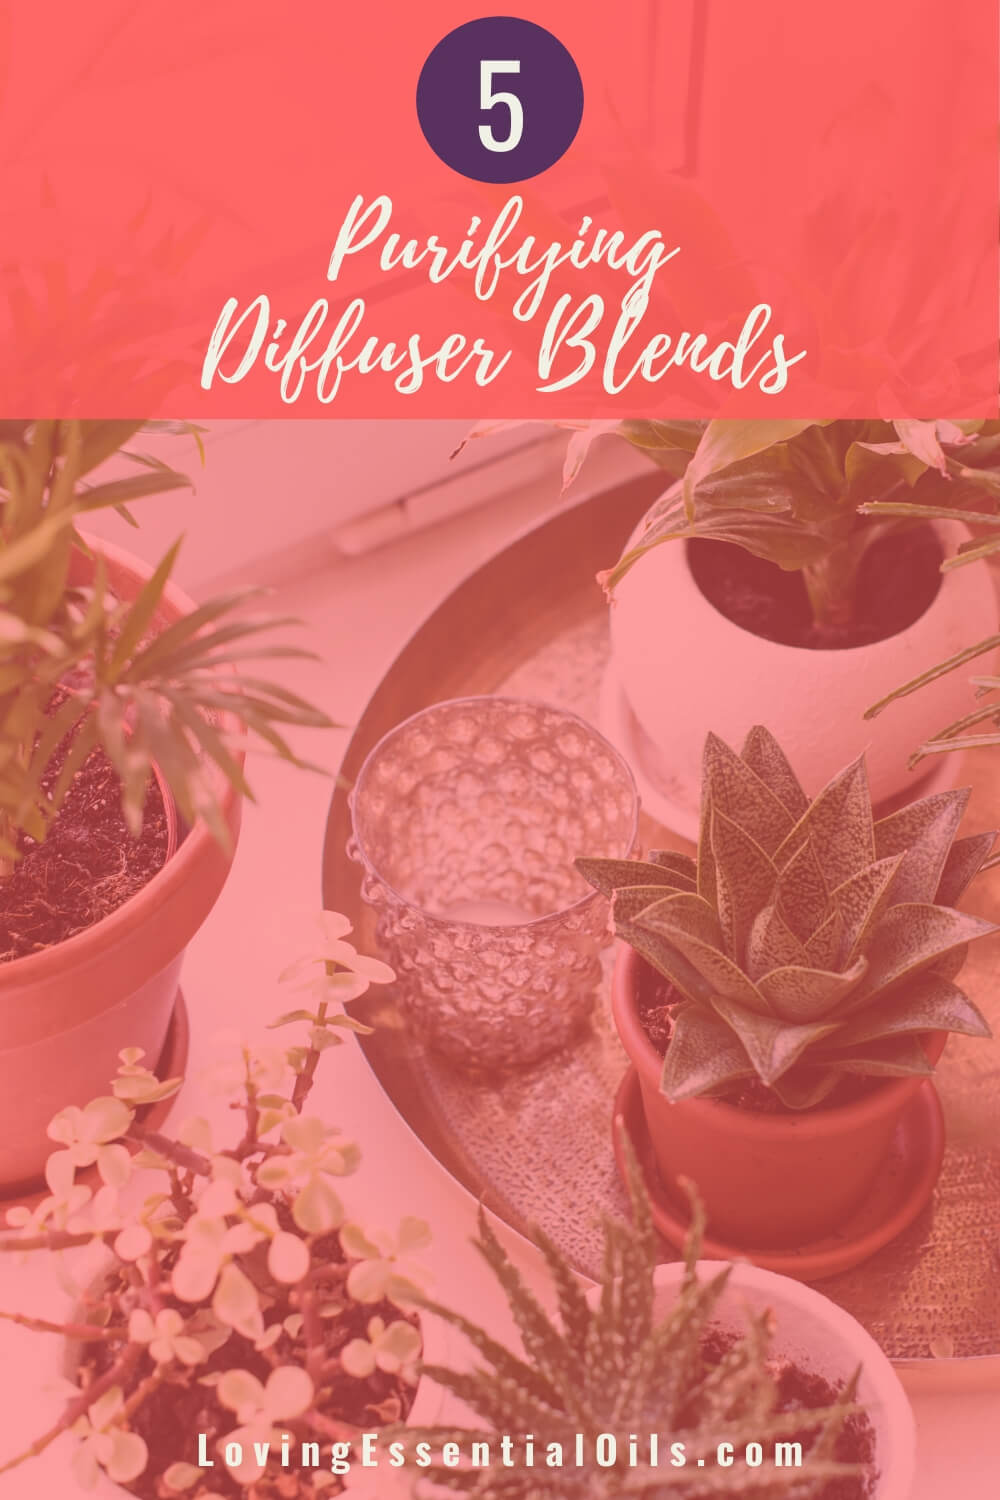 5 Purifying Diffuser Blends by Loving Essential Oils